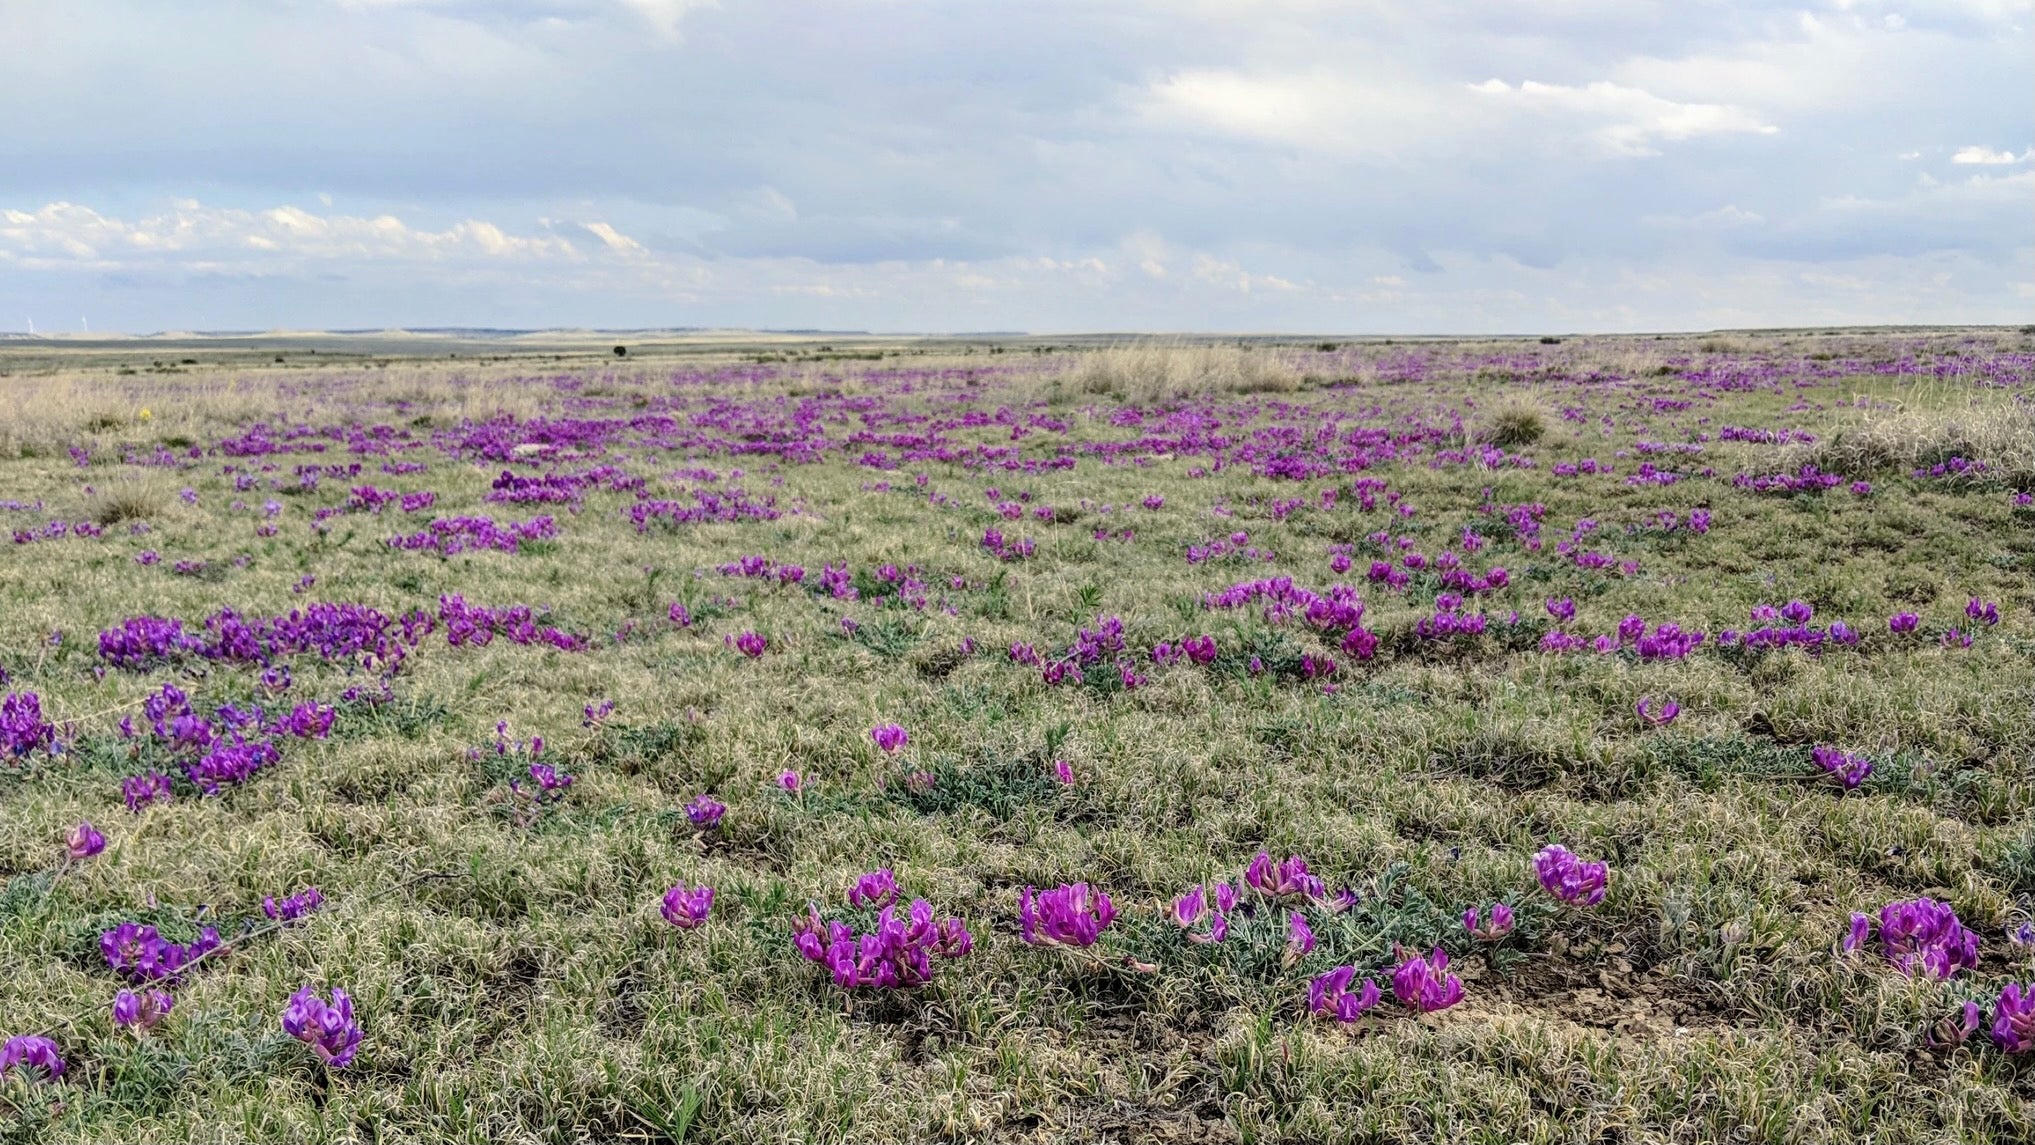 Image of a Colorado prairie with violet flowers.